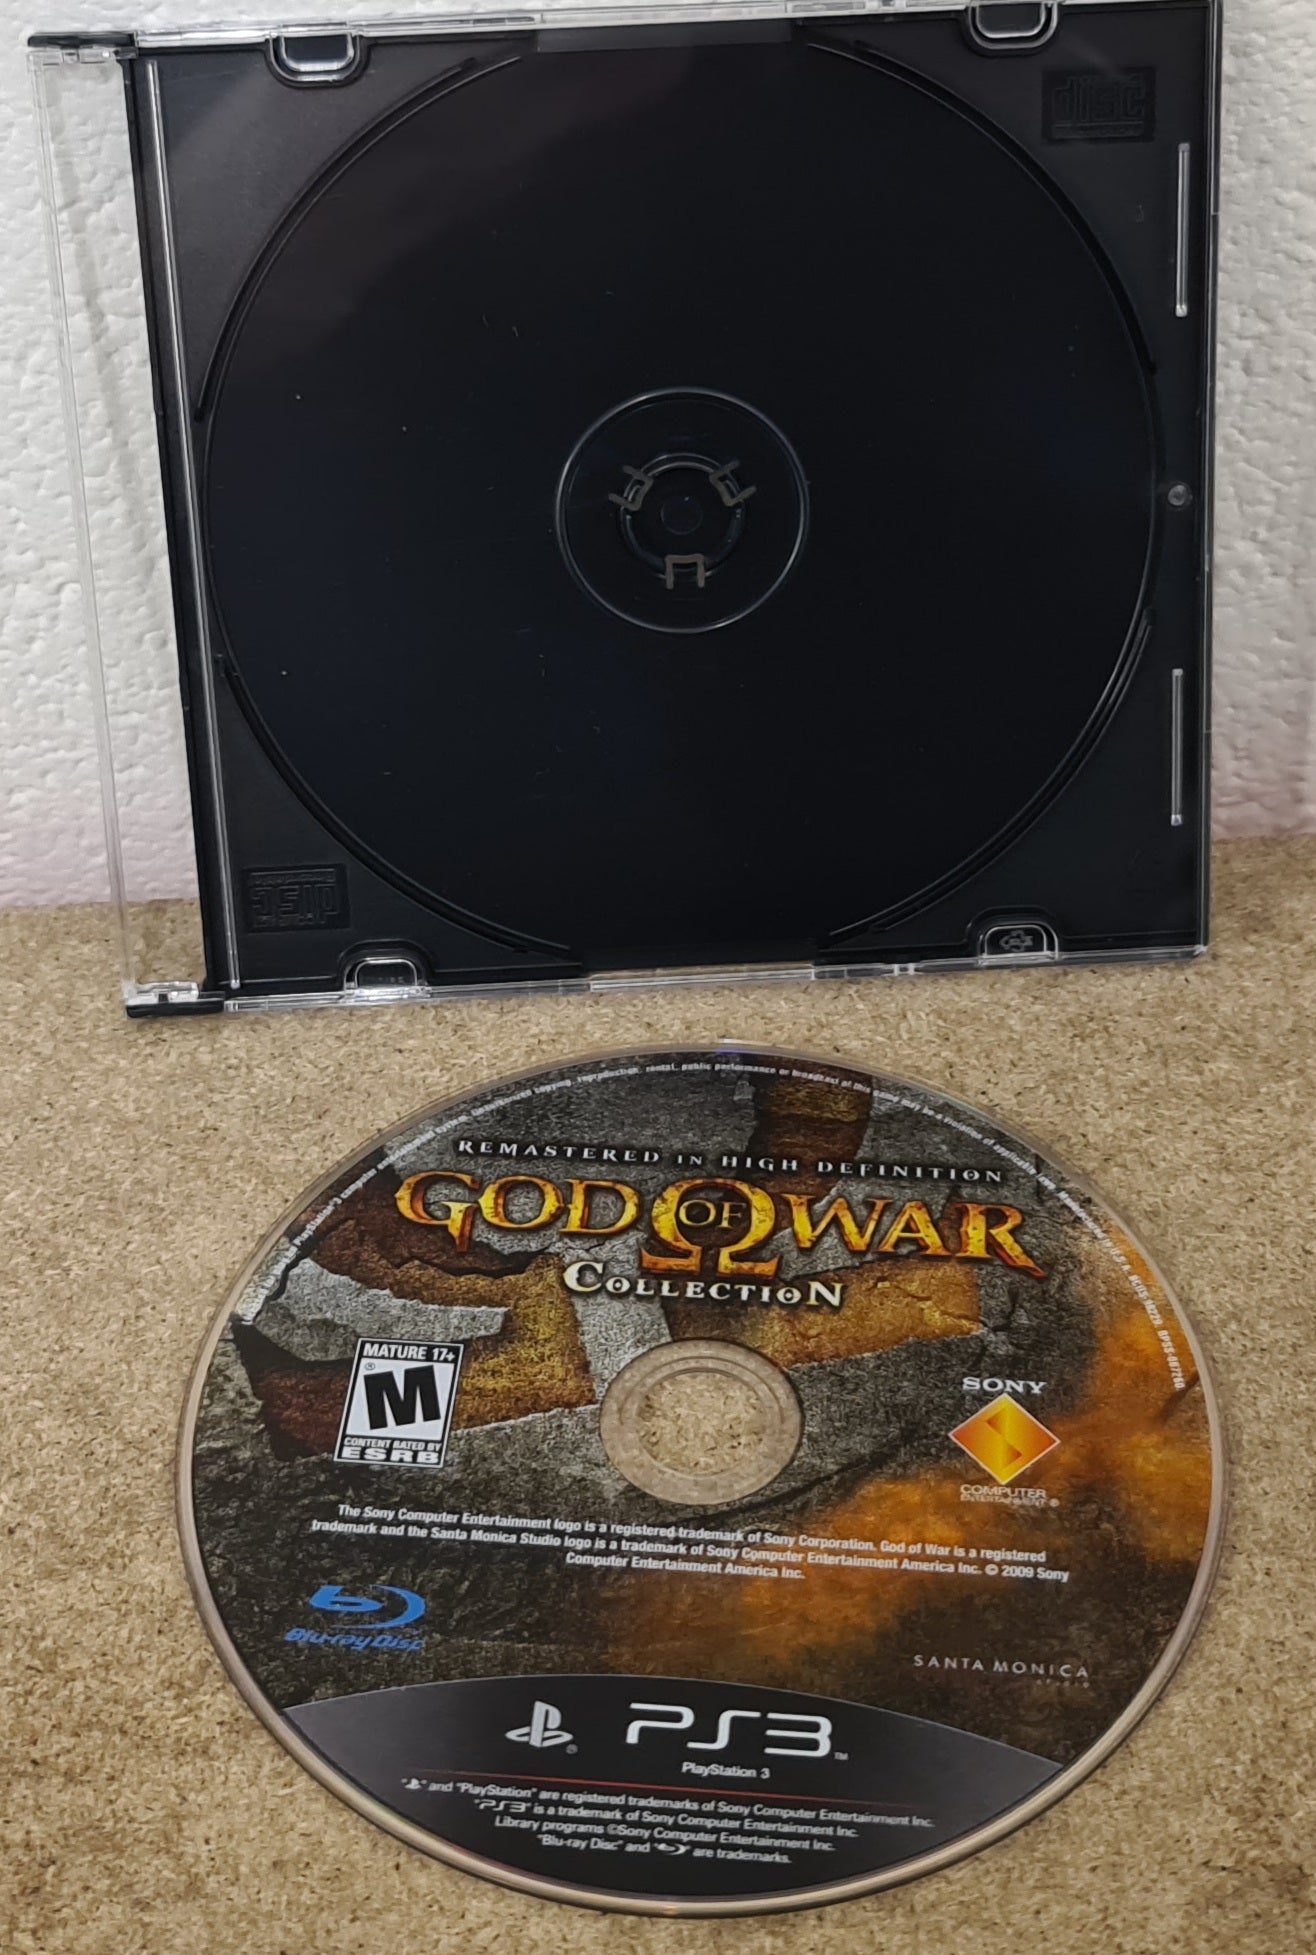 God of War Collection Sony Playstation 3 (PS3) Game Disc Only